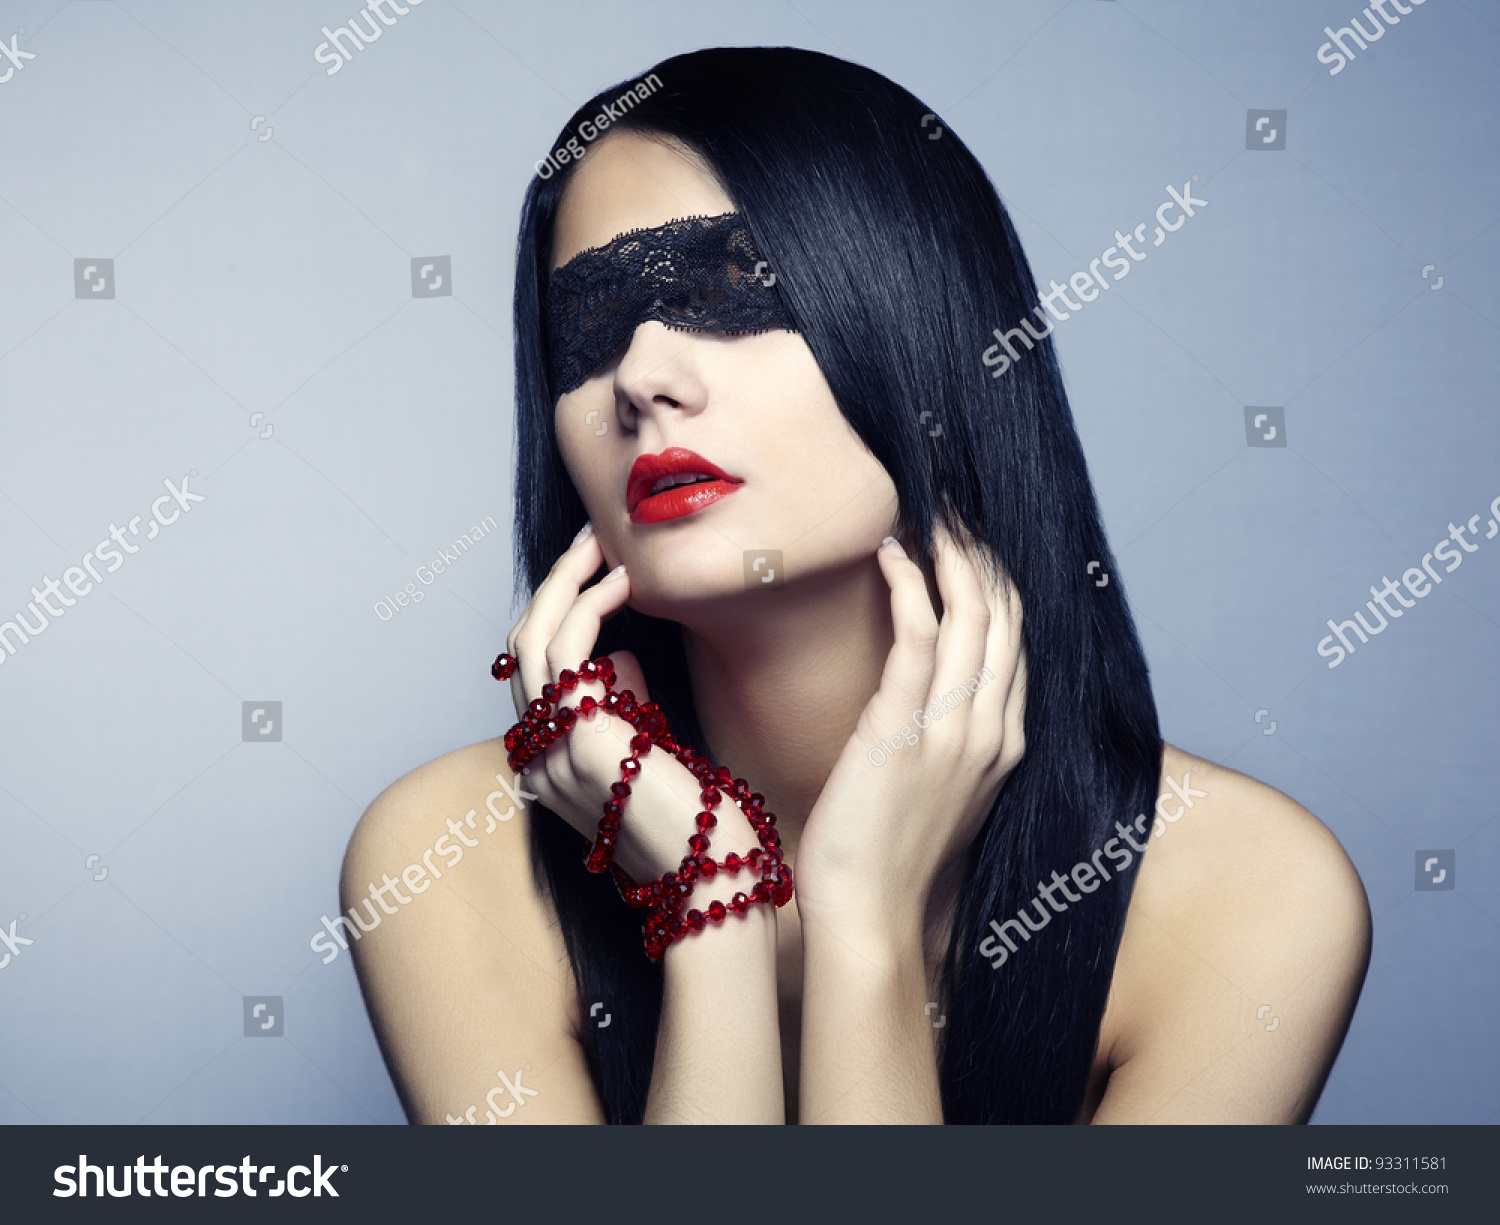 Blindfolded Picture Woman 47